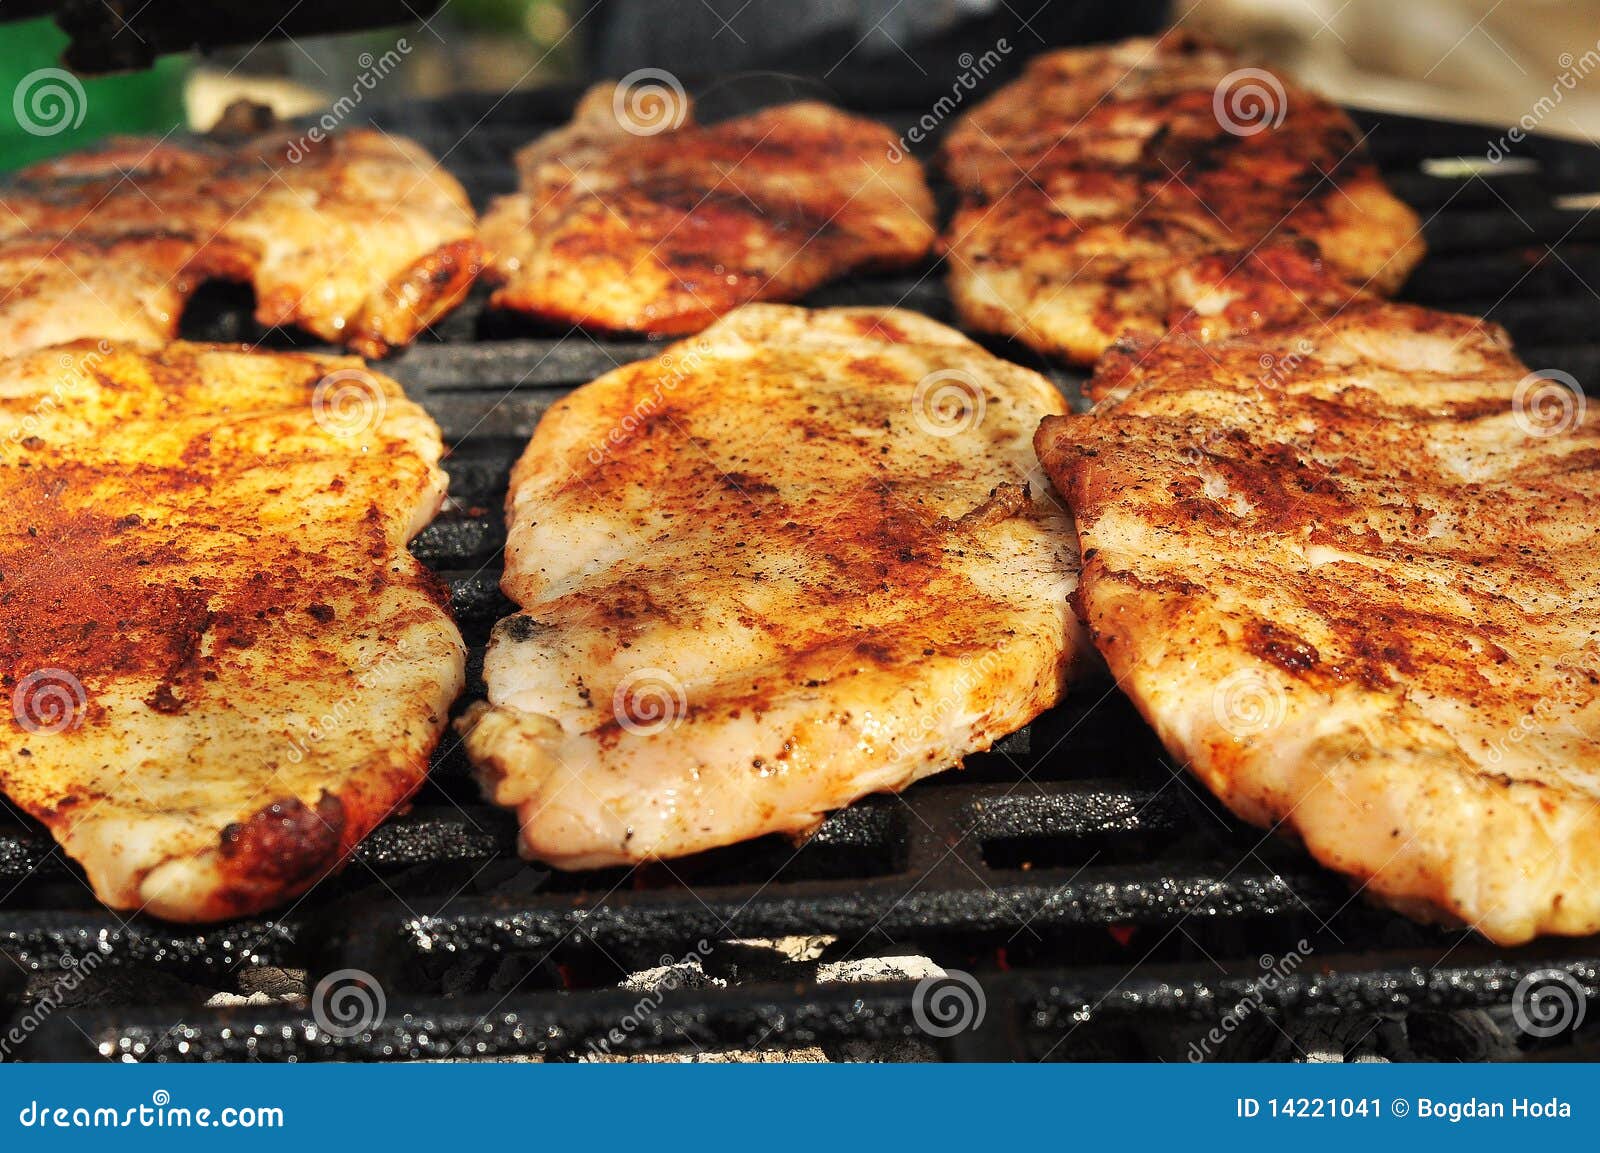 six pieces of marinated chicken breast